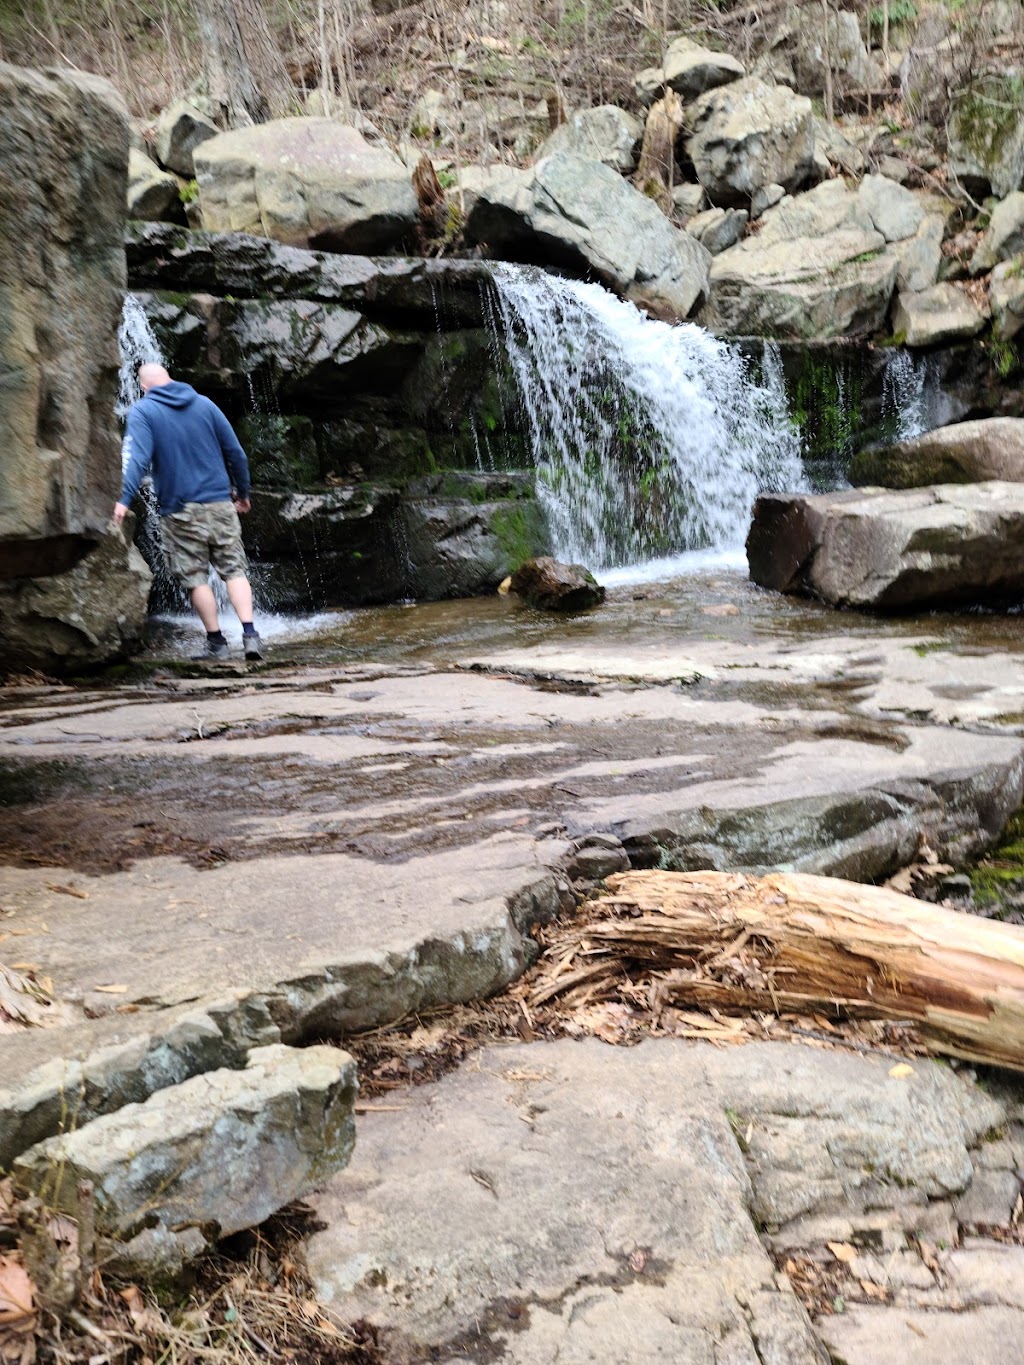 Black Rock - Mineral Springs Hiking trail | 2-16 Old Mineral Springs Rd, Highland Mills, NY 10930 | Phone: (845) 534-4517